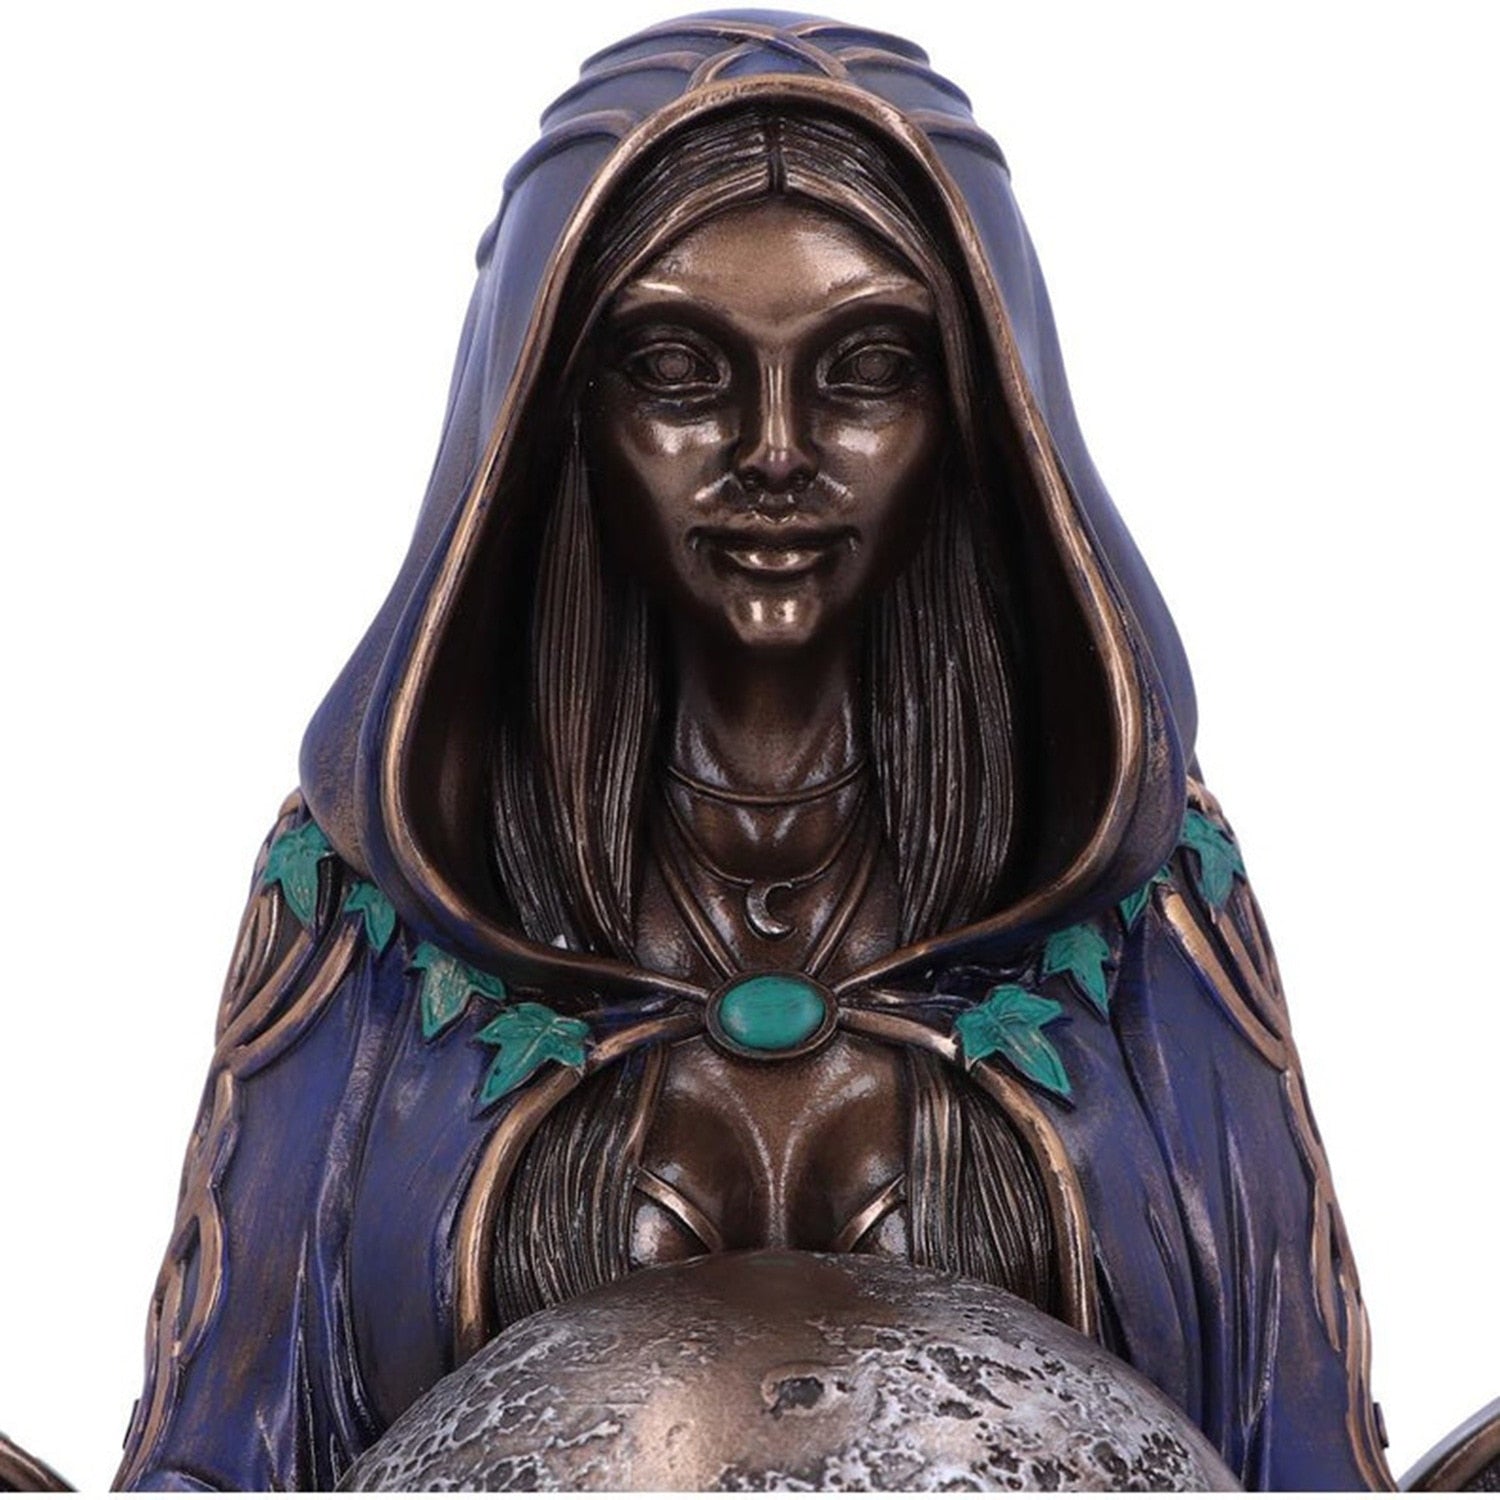 The New Mother Earth Millennial Gaia Statue Figurine - Creatrix of Life Gaia Mother of Earth Oberon Zell Milenial Te Fiti Type Goddess Statue